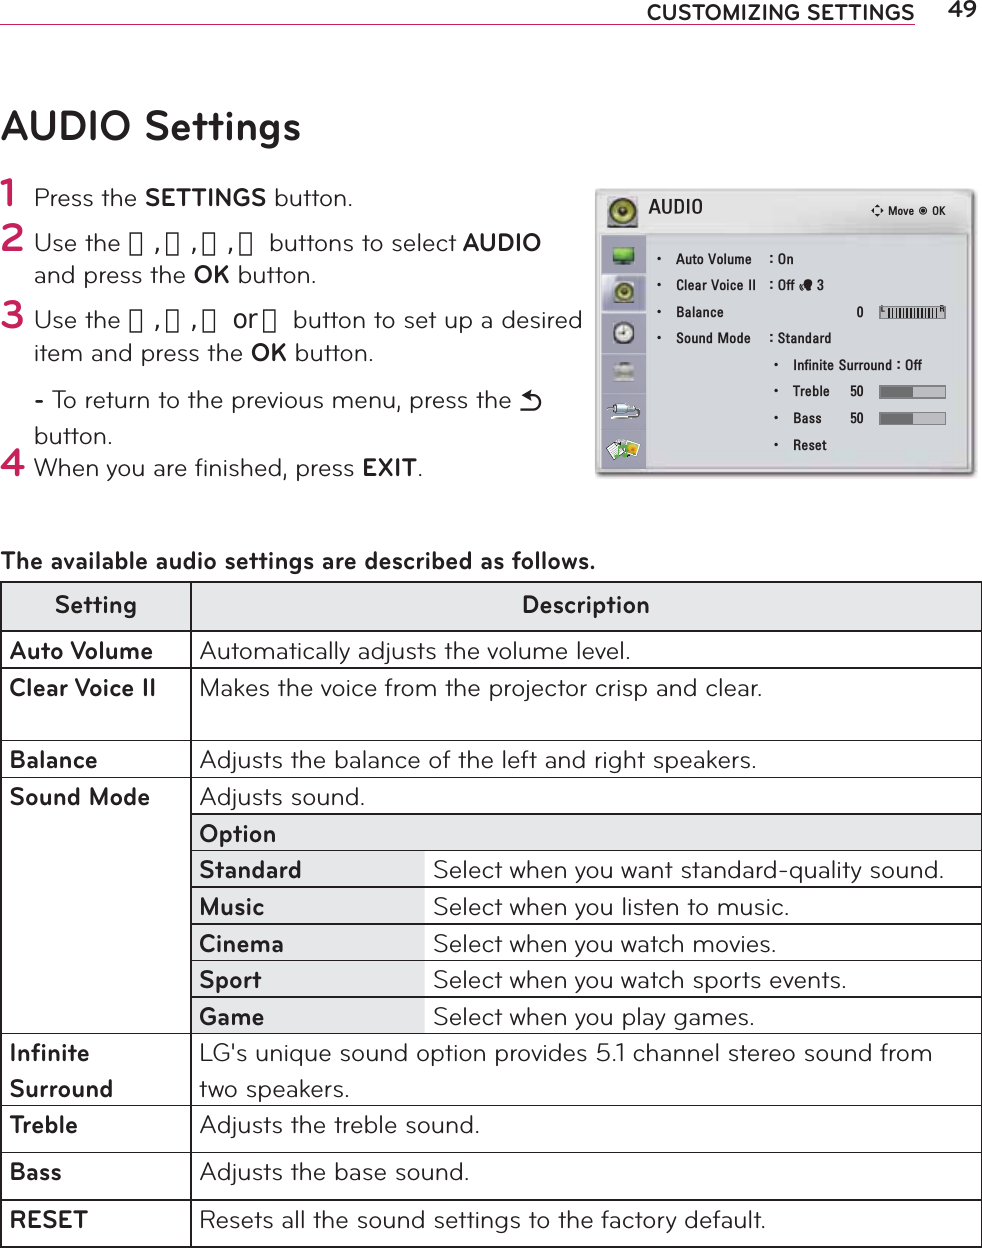 49CUSTOMIZING SETTINGSAUDIO Settings1 Press the SETTINGS button.2 Use the 󱛨, 󱛩, 󱛦, 󱛧 buttons to select AUDIO and press the OK button.3 Use the 󱛨, 󱛩, 󱛦 or 󱛧 button to set up a desired item and press the OK button.- To return to the previous menu, press the ᰳ button.4 When you are ﬁnished, press EXIT.The available audio settings are described as follows.Setting DescriptionAuto Volume Automatically adjusts the volume level.Clear Voice II Makes the voice from the projector crisp and clear.Balance Adjusts the balance of the left and right speakers.Sound Mode Adjusts sound.OptionStandard Select when you want standard-quality sound.Music Select when you listen to music.Cinema Select when you watch movies.Sport Select when you watch sports events.Game Select when you play games.Inﬁnite  SurroundLG&apos;s unique sound option provides 5.1 channel stereo sound from two speakers.Treble Adjusts the treble sound.Bass Adjusts the base sound.RESET Resets all the sound settings to the factory default.$8&apos;,2ؒ $XWR9ROXPH 2Qؒ &amp;OHDU9RLFH,, 2IIᰕؒ %DODQFH   / 5ؒ 6RXQG0RGH 6WDQGDUGؒ ,QILQLWH6XUURXQG2IIؒ 7UHEOH ؒ %DVV ؒ 5HVHWᯒ0RYHᯙ2.